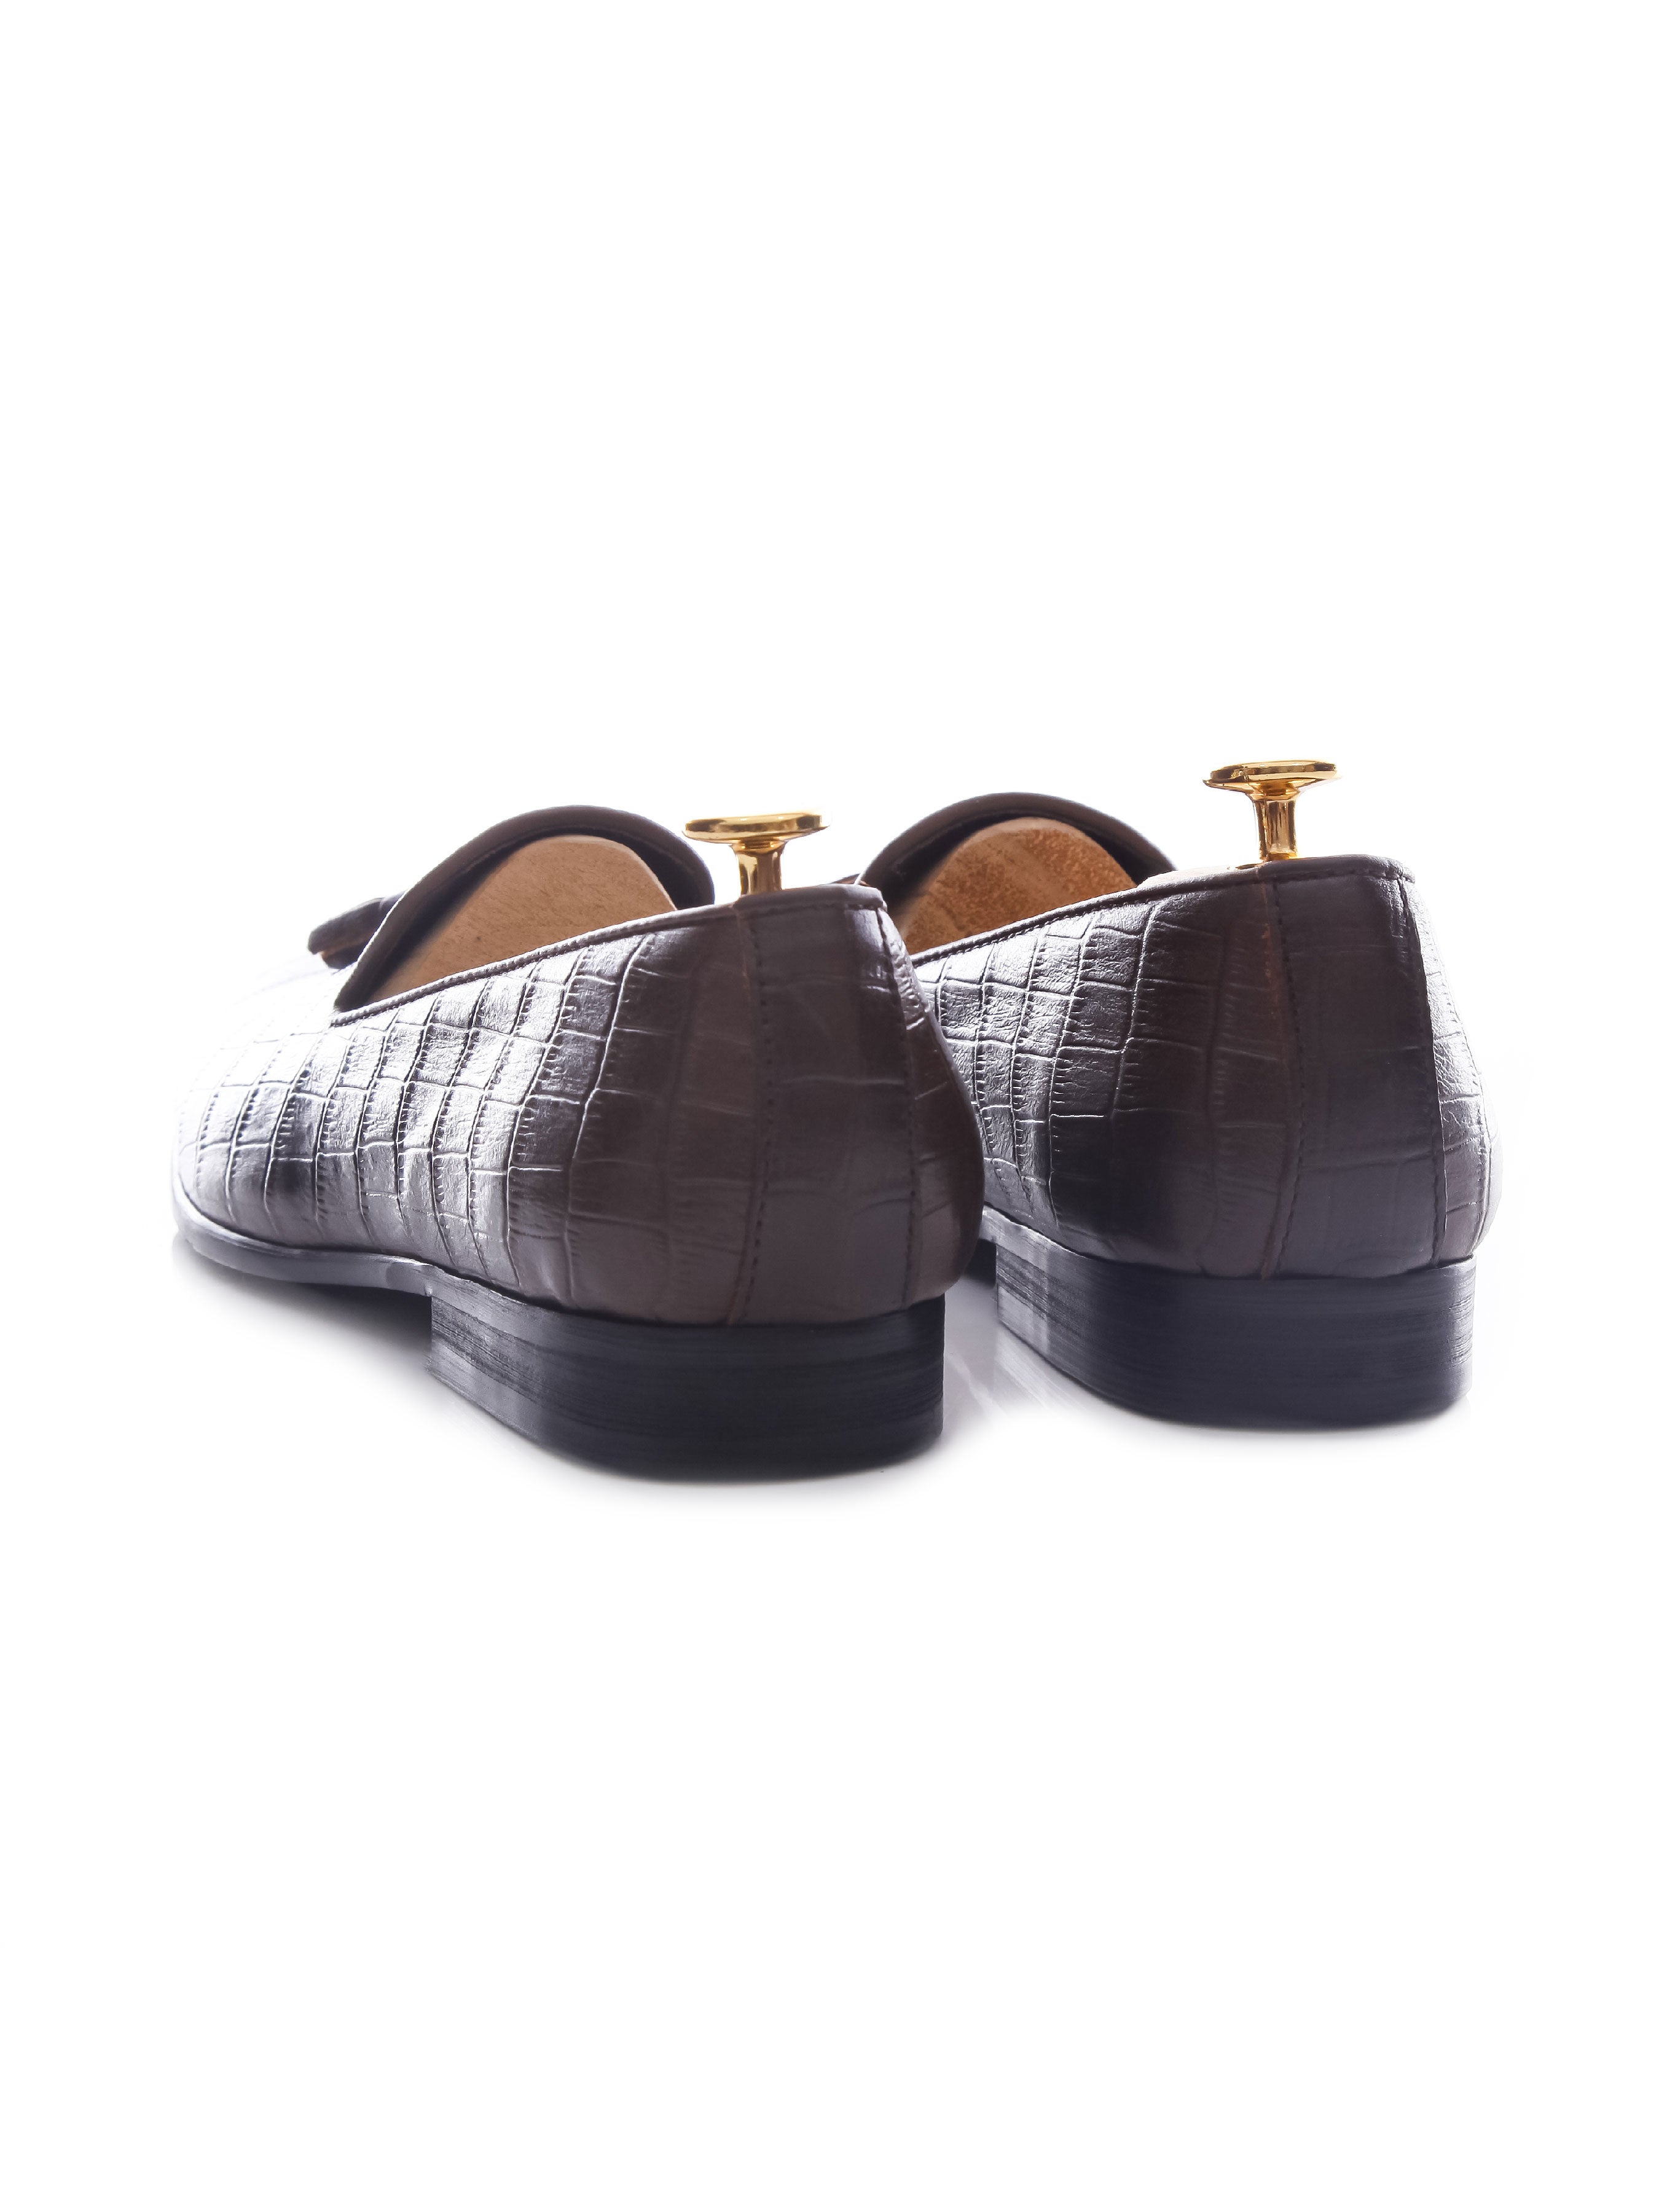 Loafer Slipper - Coffee Croco Leather - Zeve Shoes